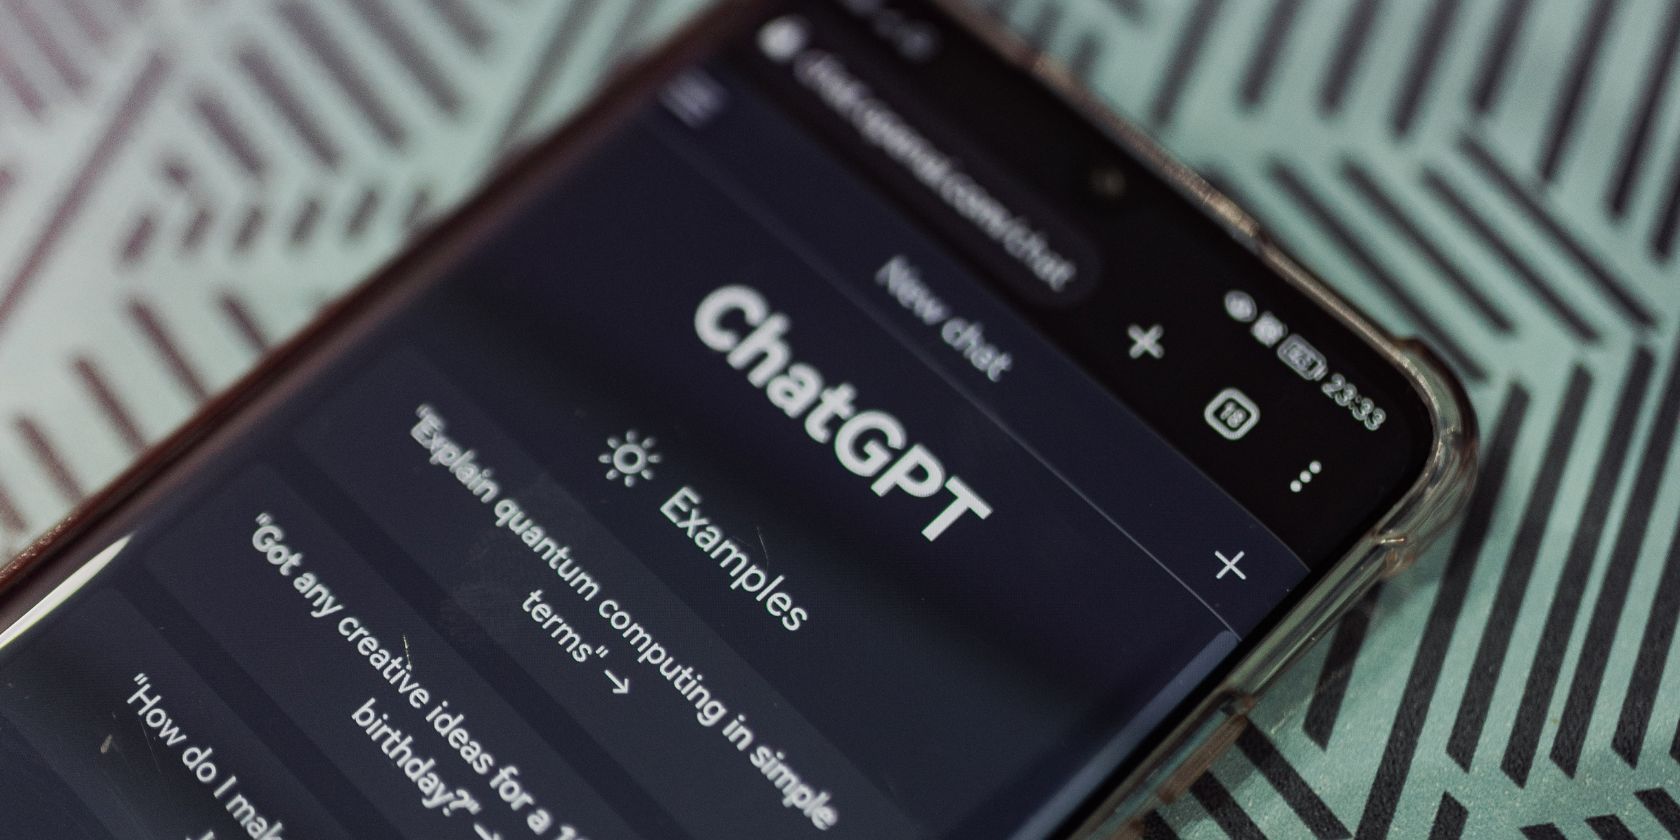 image of chatgpt open on smartphone screen